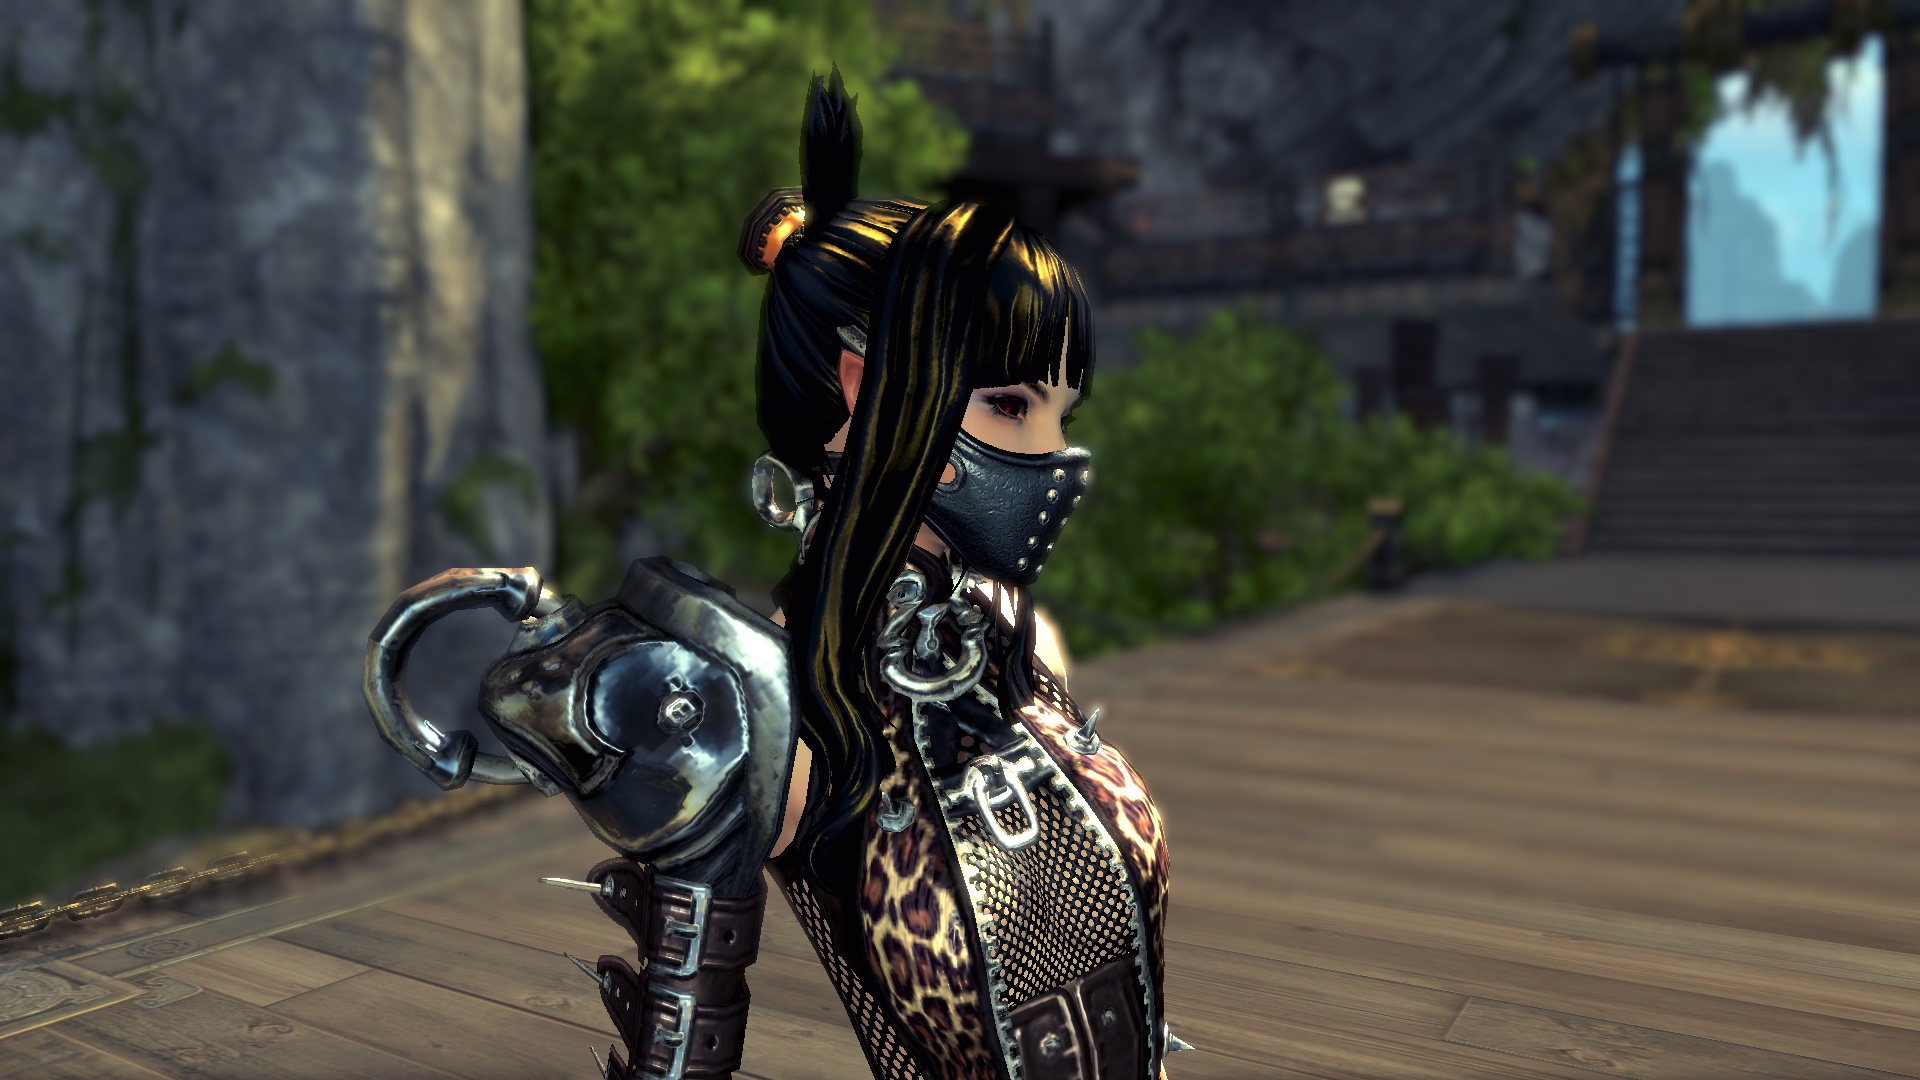 Blade and soul 2. Blade and Soul игра. ММОРПГ Blade and Soul. Блейд энд соулс 2. Blade and Soul Скриншоты.